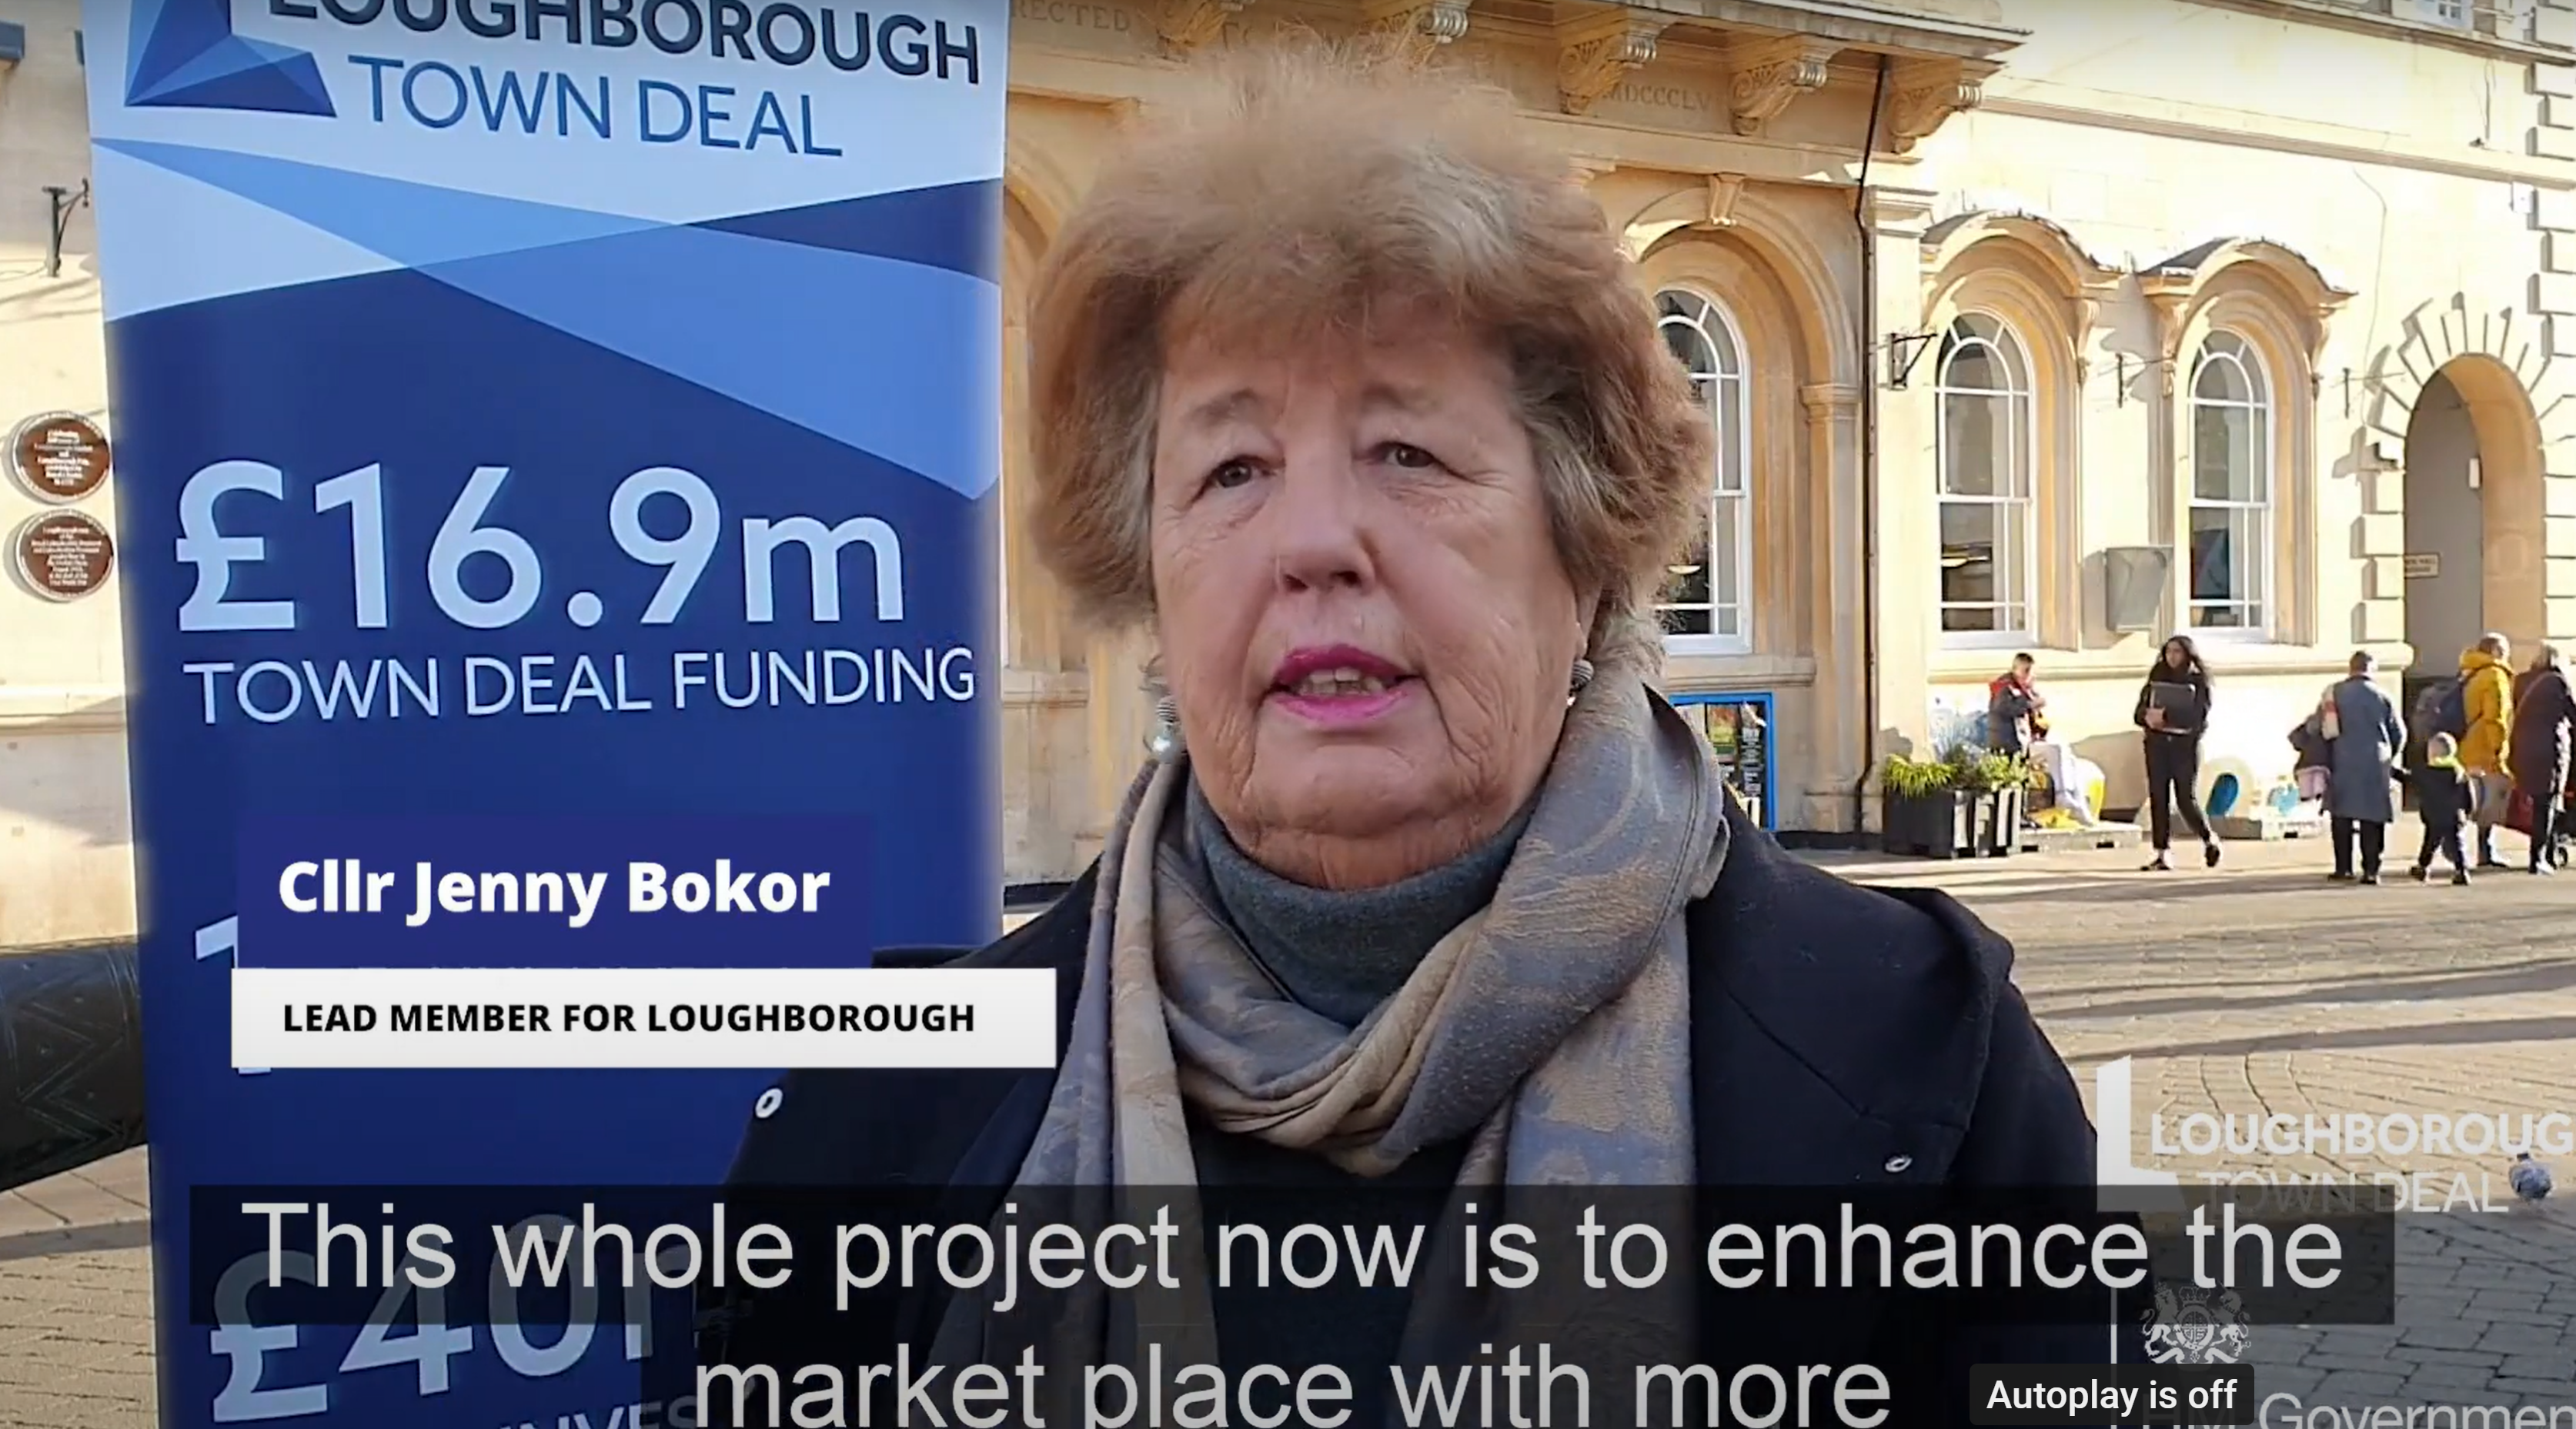 Video: The Living Loughborough project will be a boost for the town centre